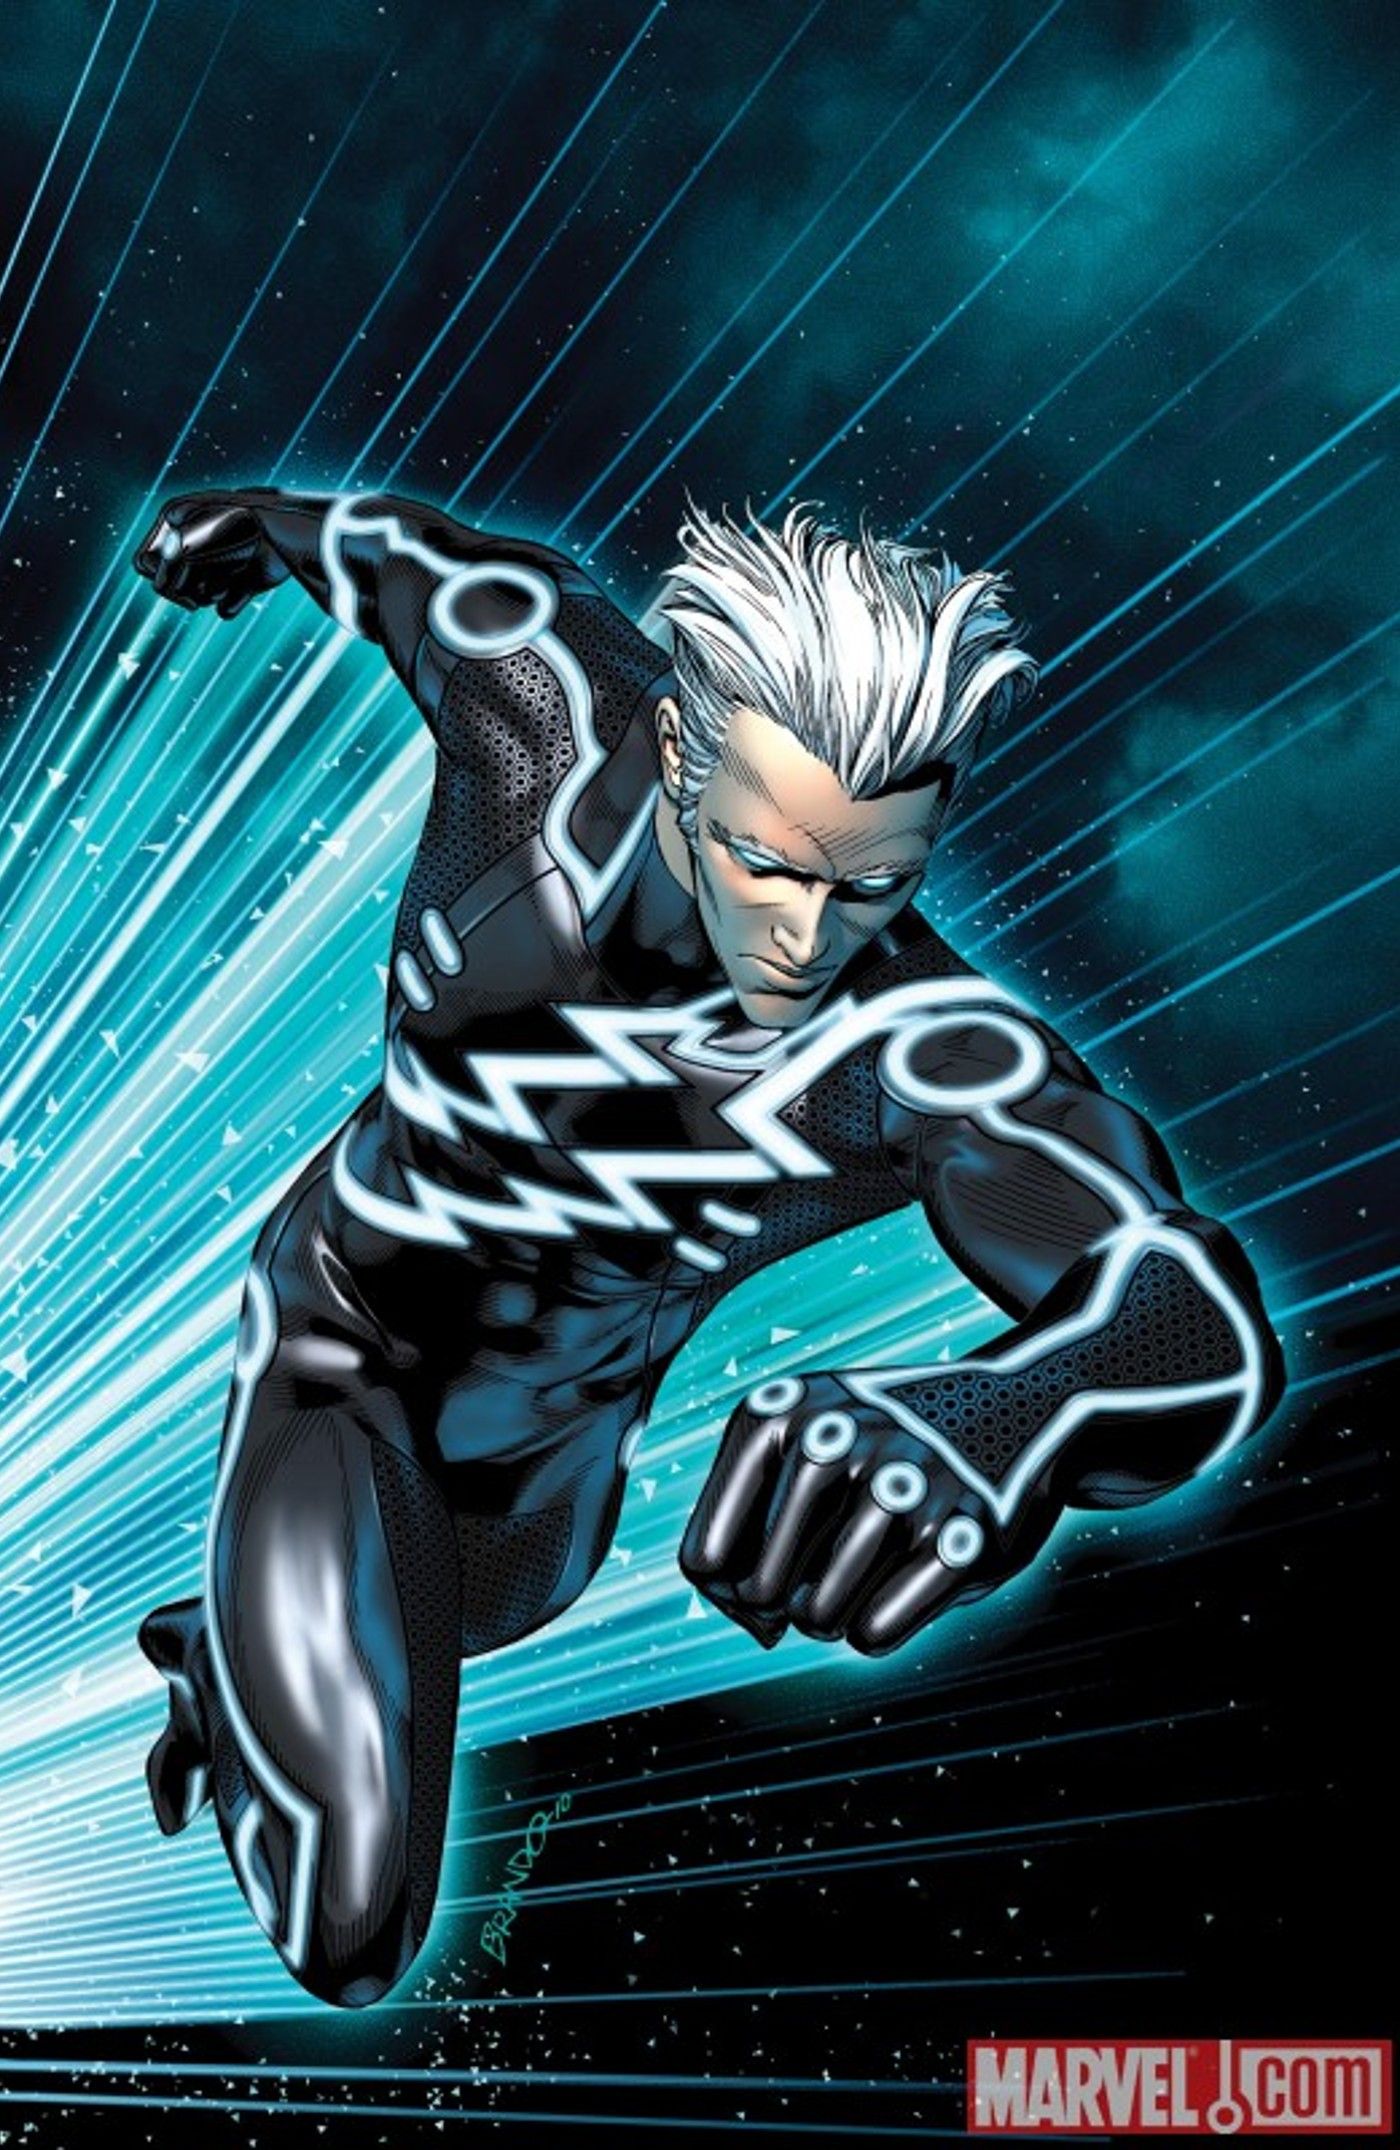 Quicksilver's Official Tron Costume Is the Best He Ever Had.